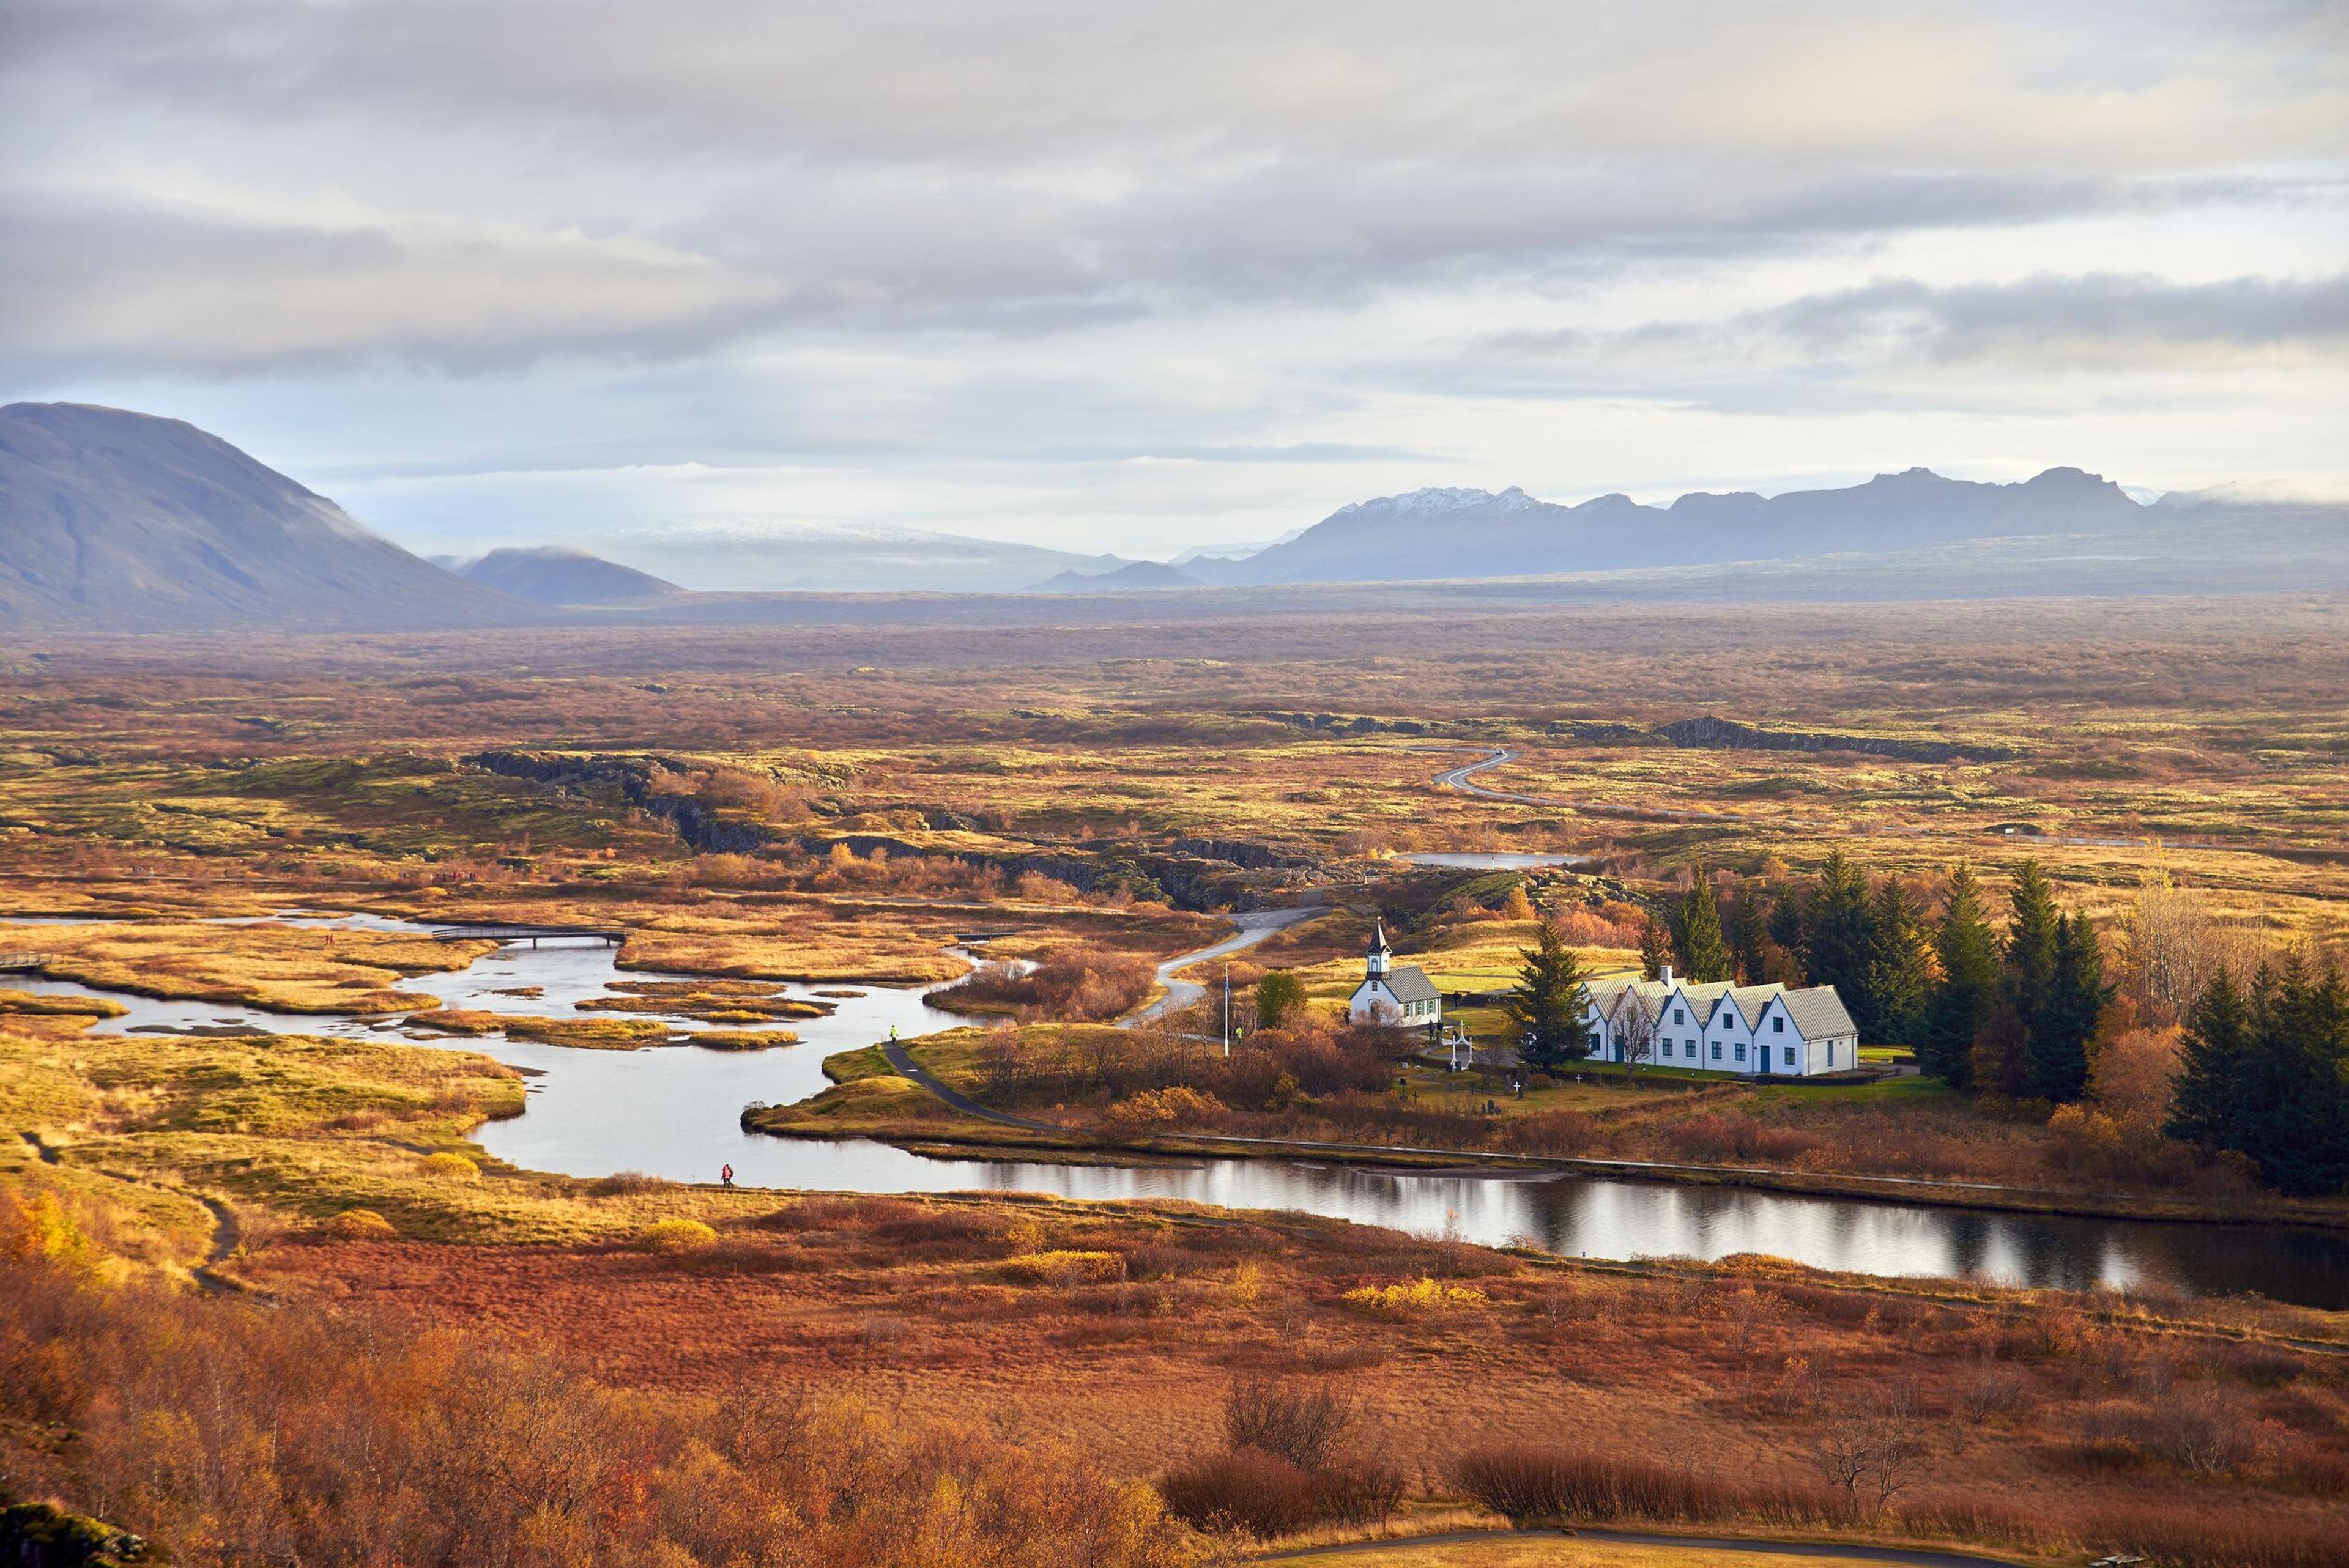 Scenic view of Thingvellir National Park in Iceland, featuring autumn colors, winding rivers, and a small cluster of buildings amidst a vast landscape.